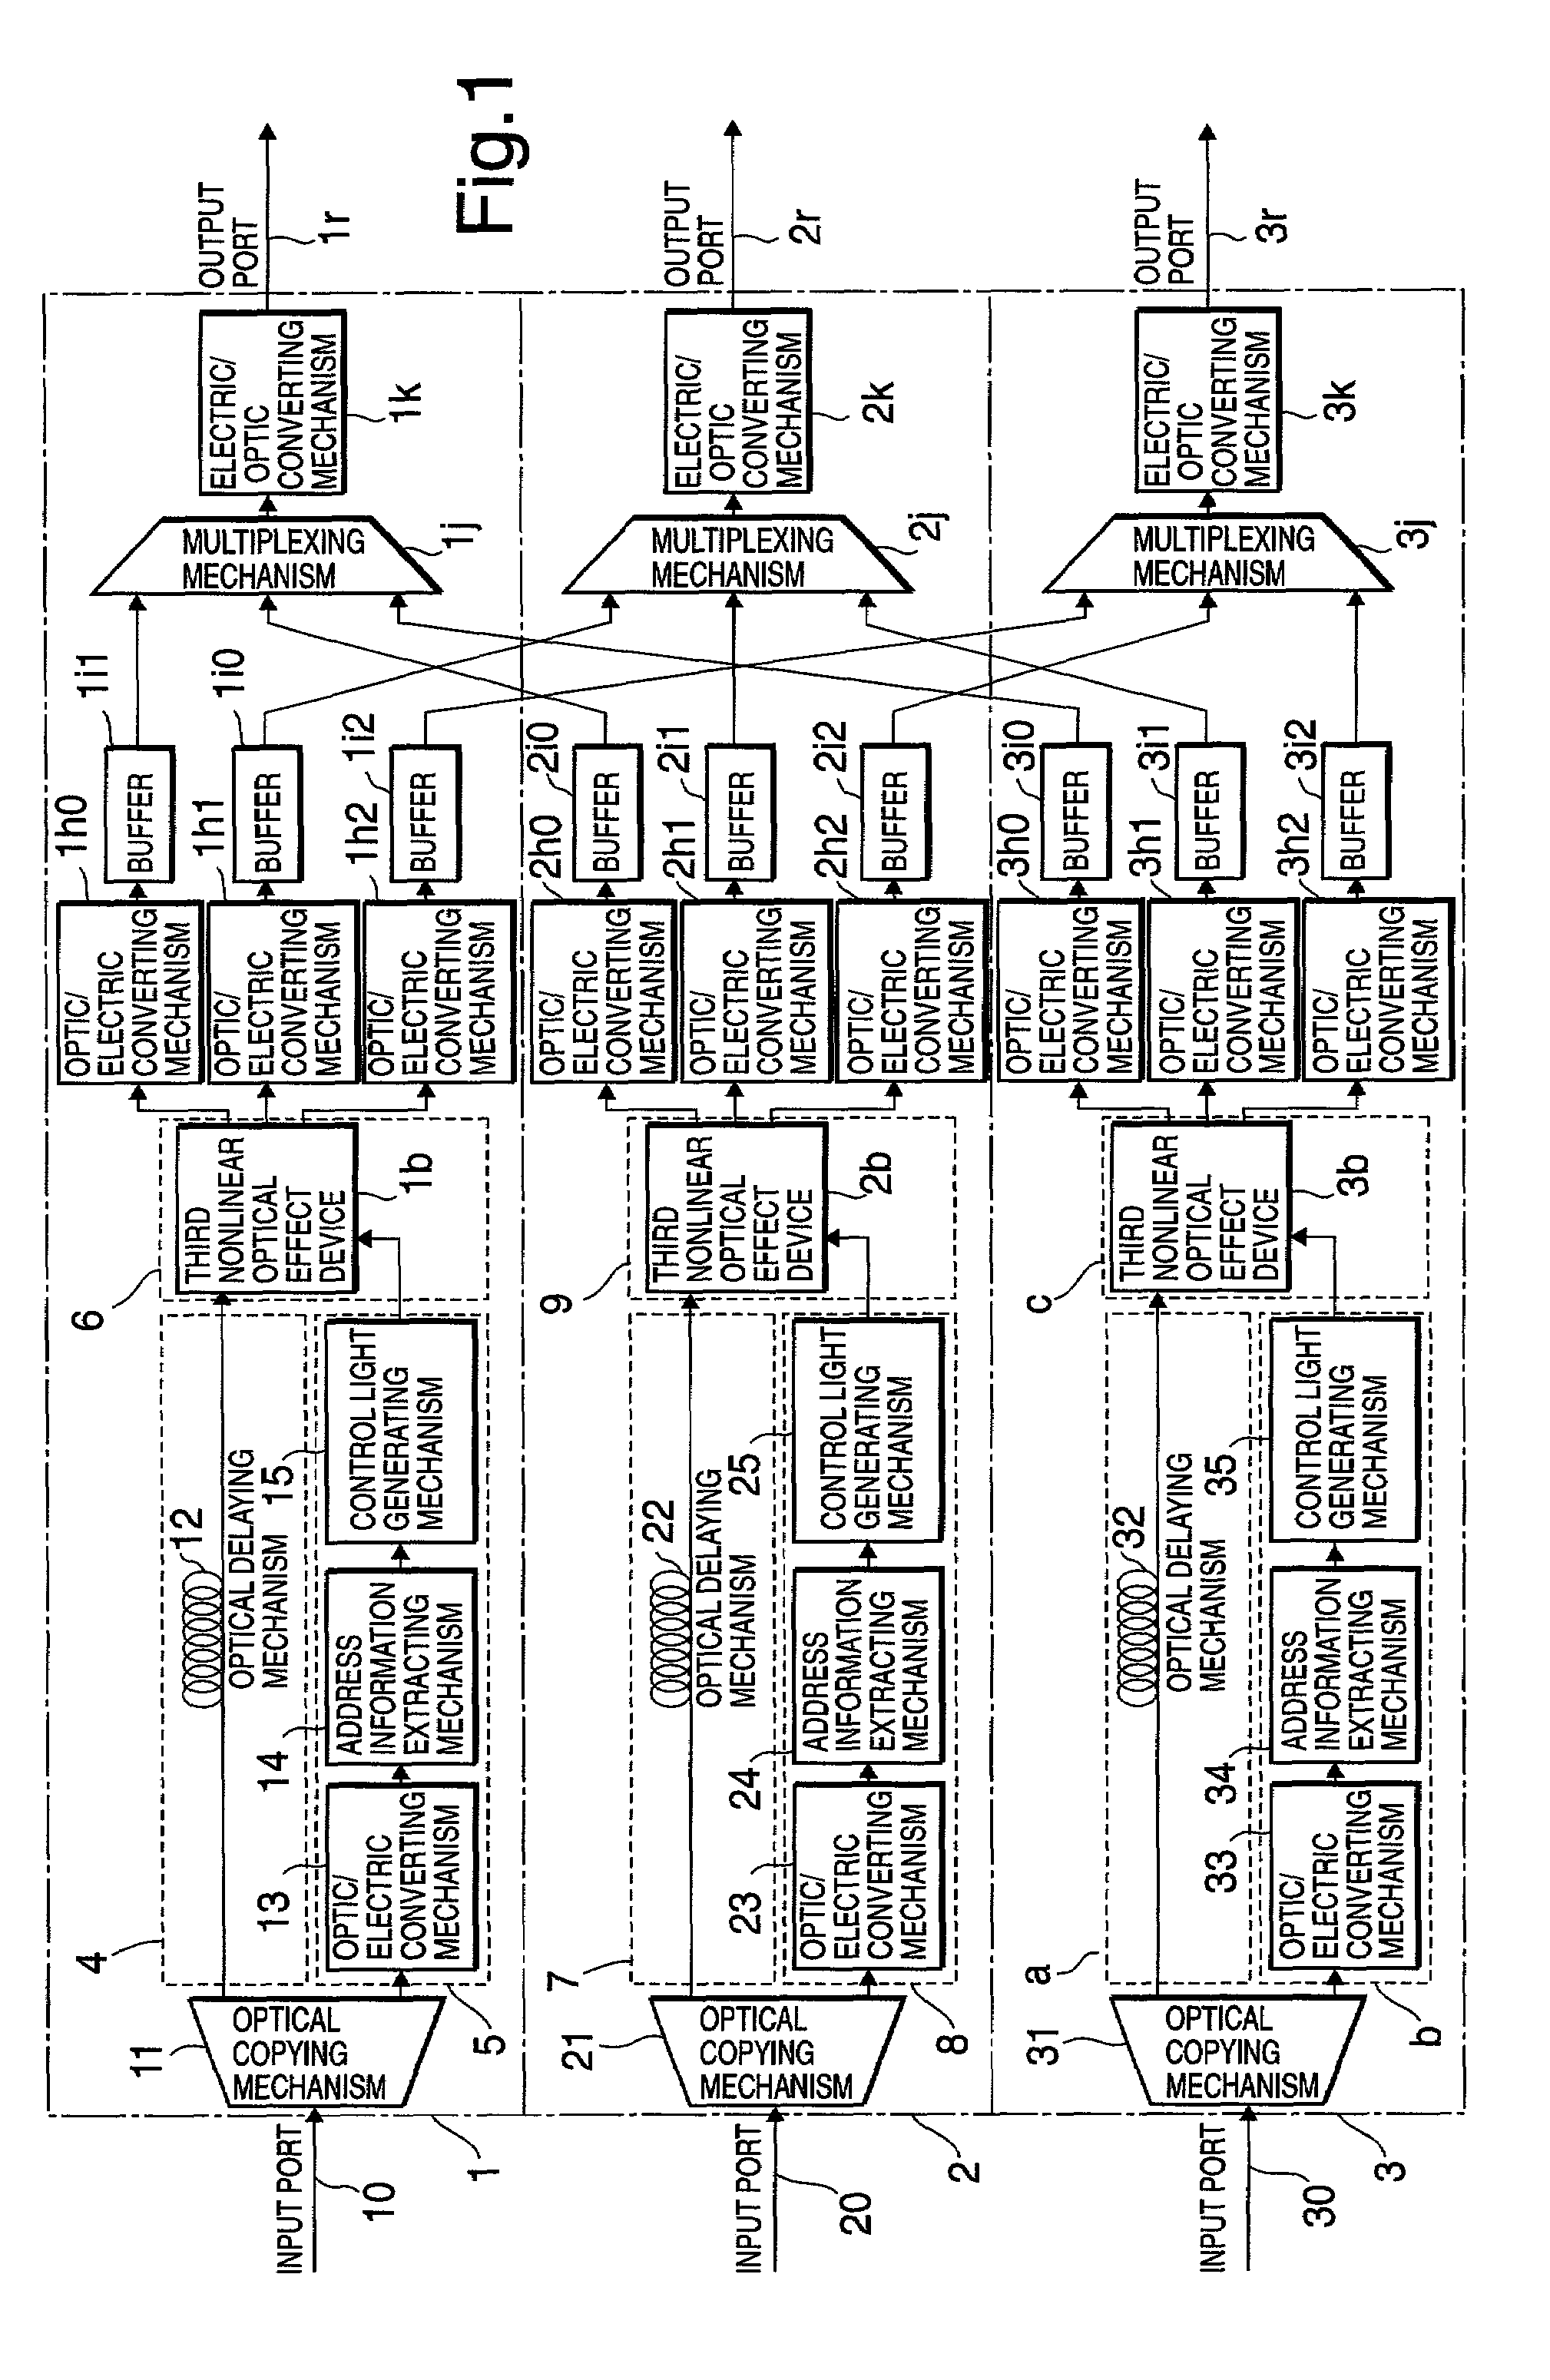 Apparatus and method for self-routing optical packet